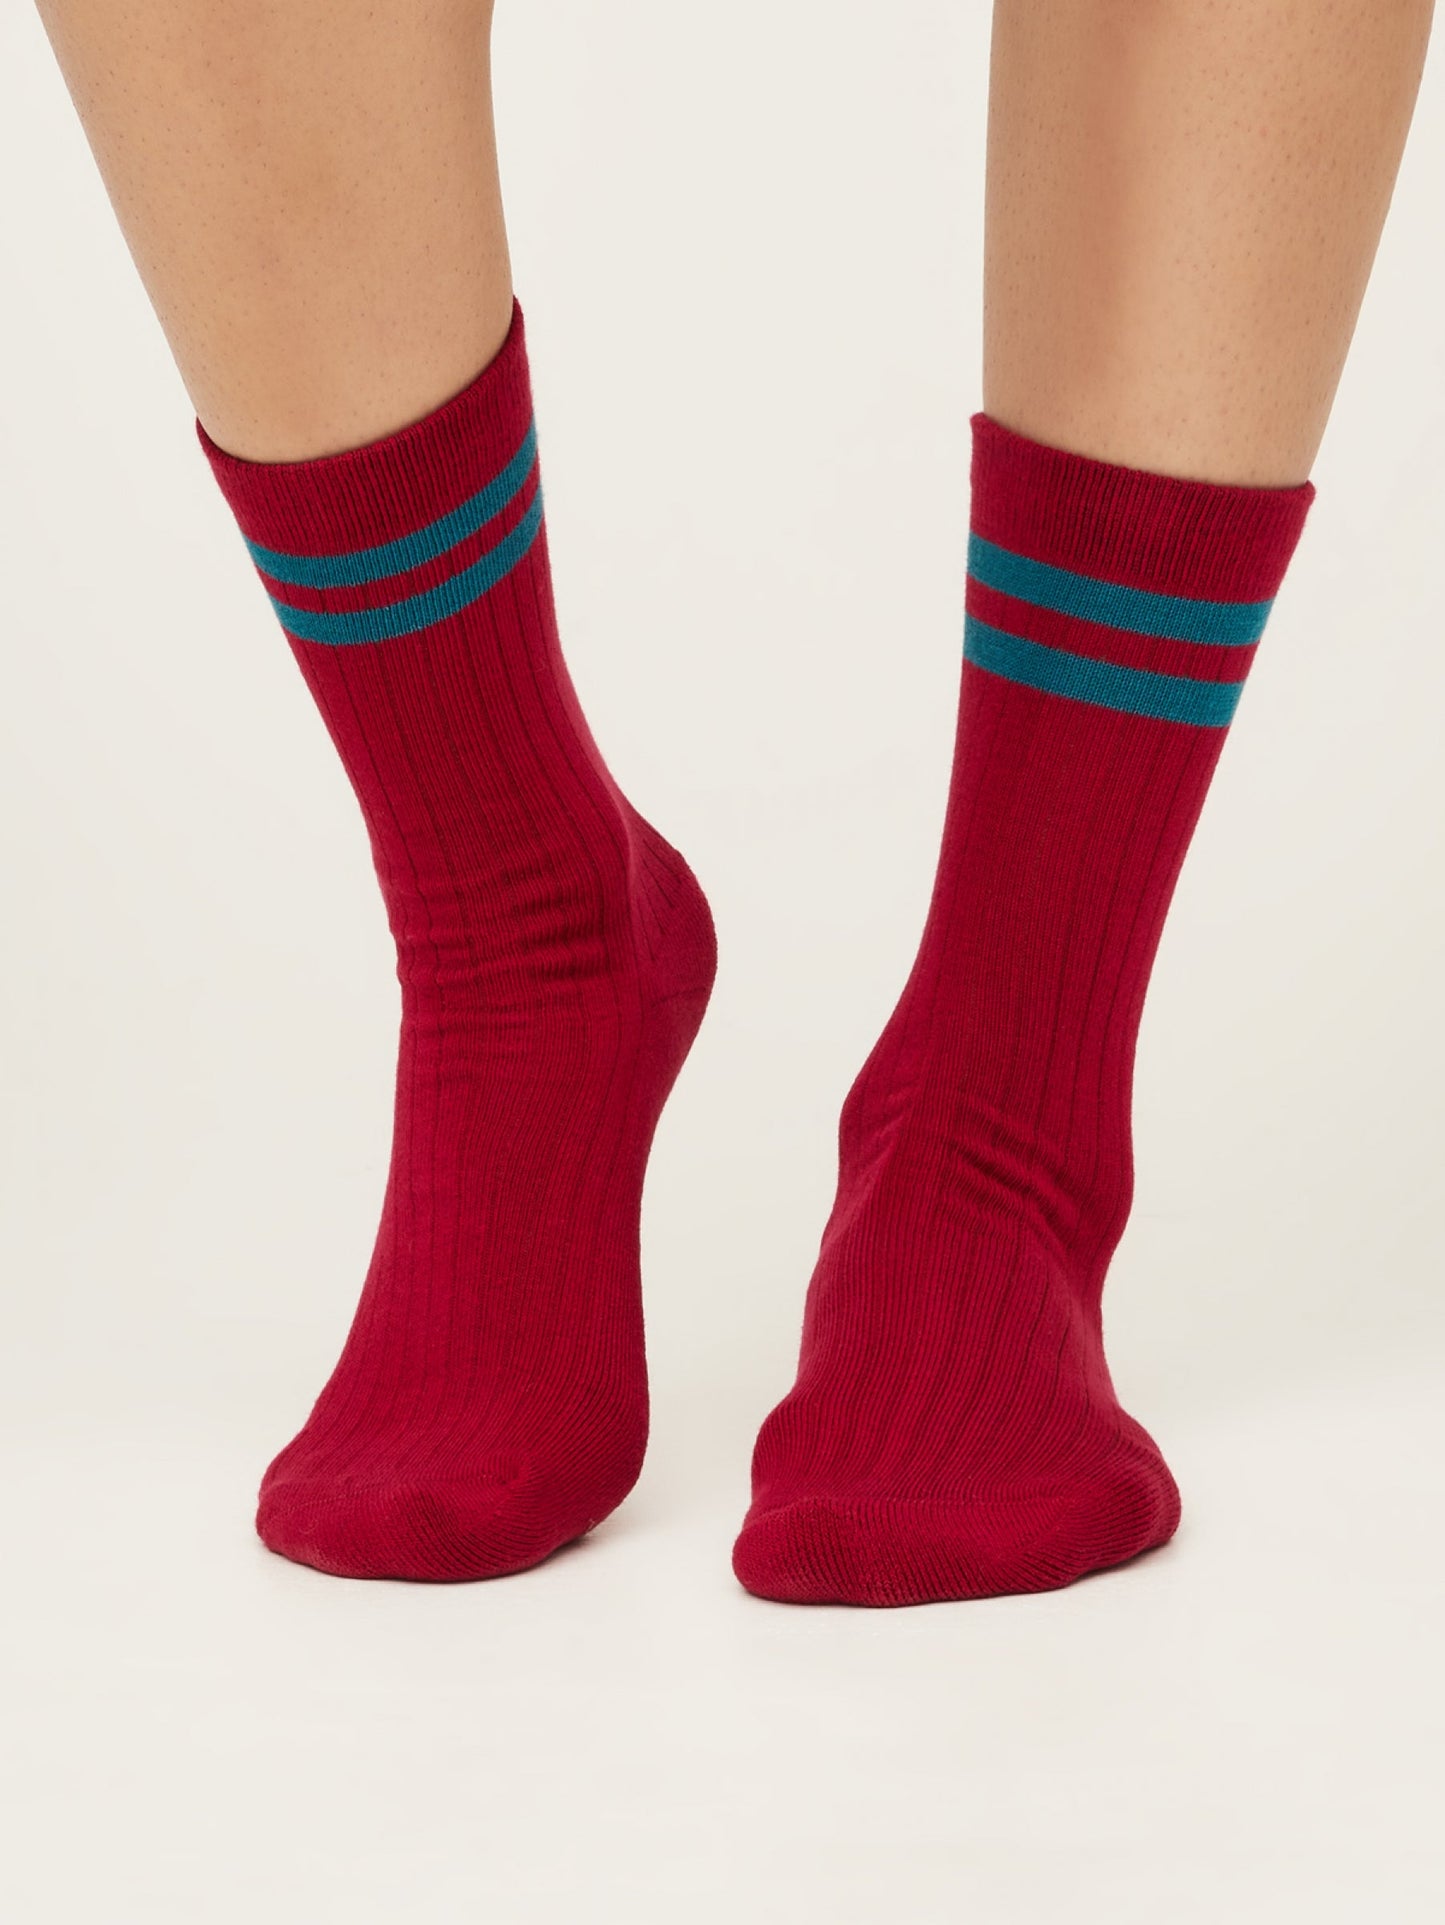 Rugby-2 - Cotton - Socks